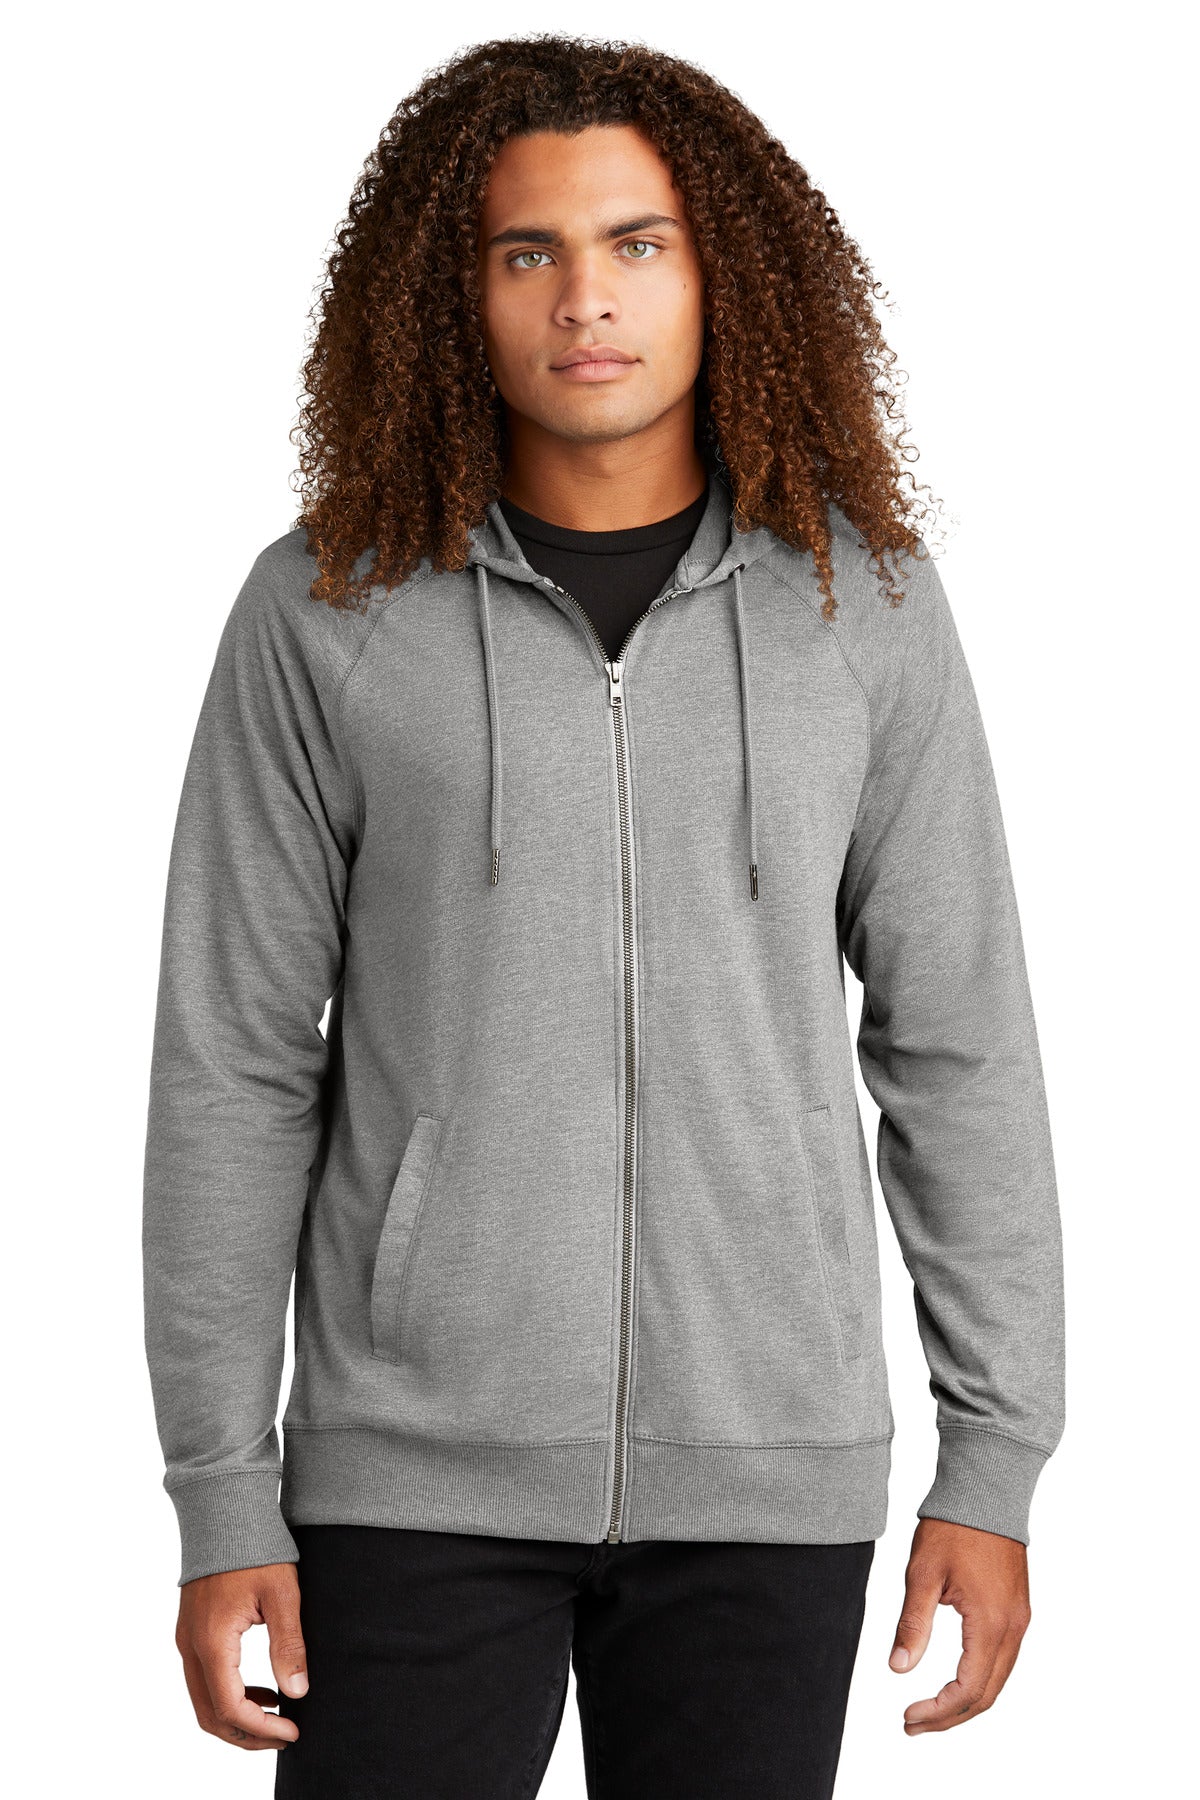 District® Featherweight French Terry™ Full-Zip Hoodie DT573